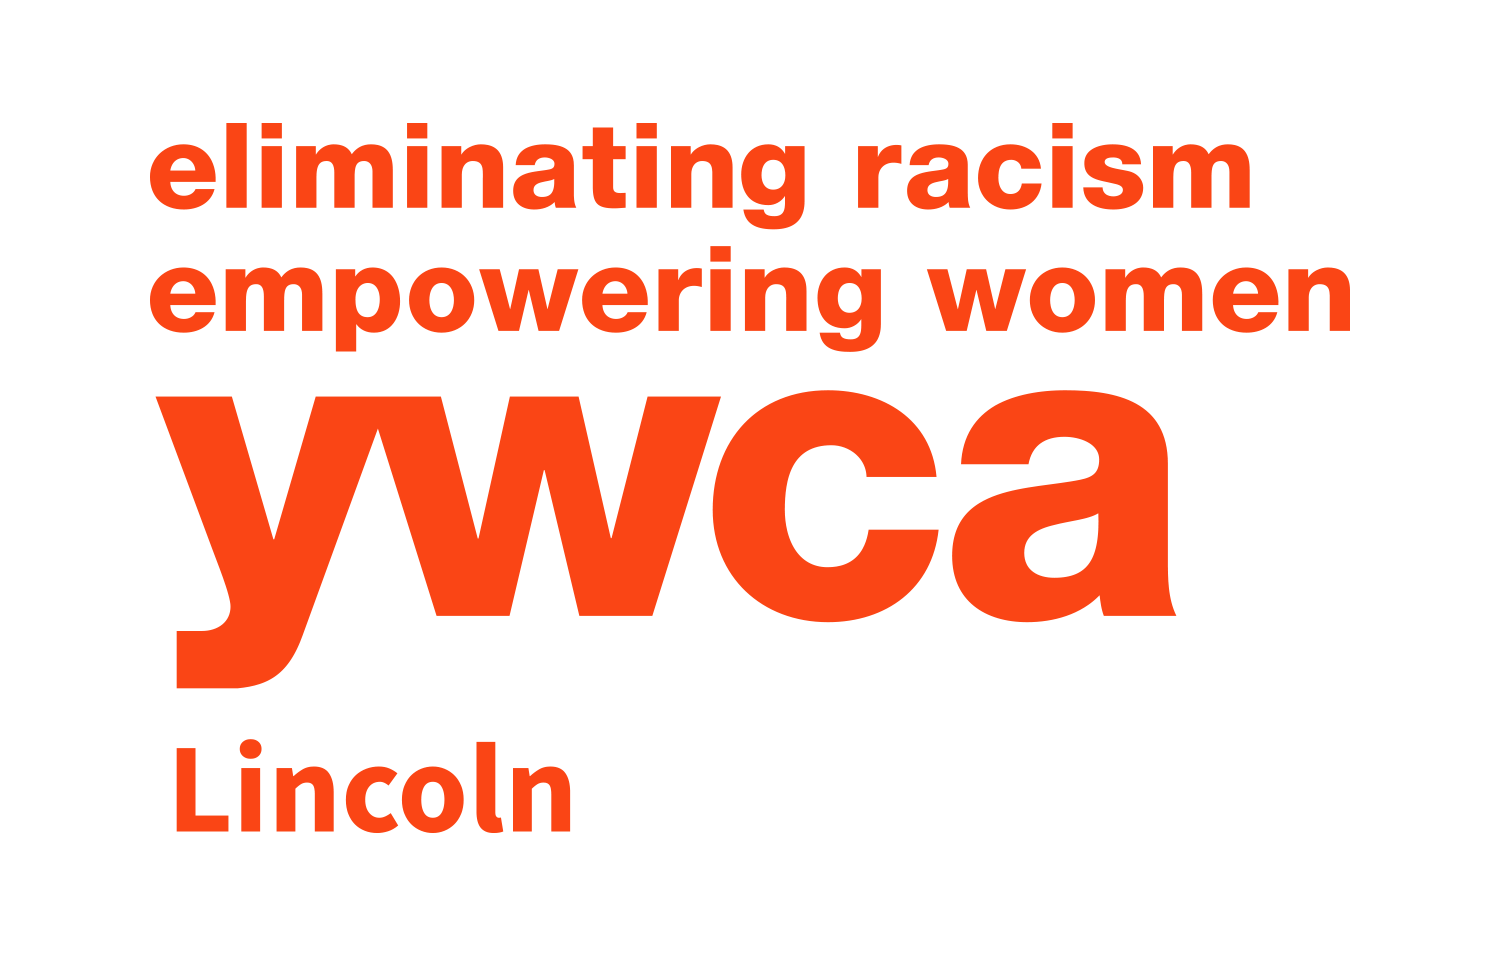 YWCA of Lincoln